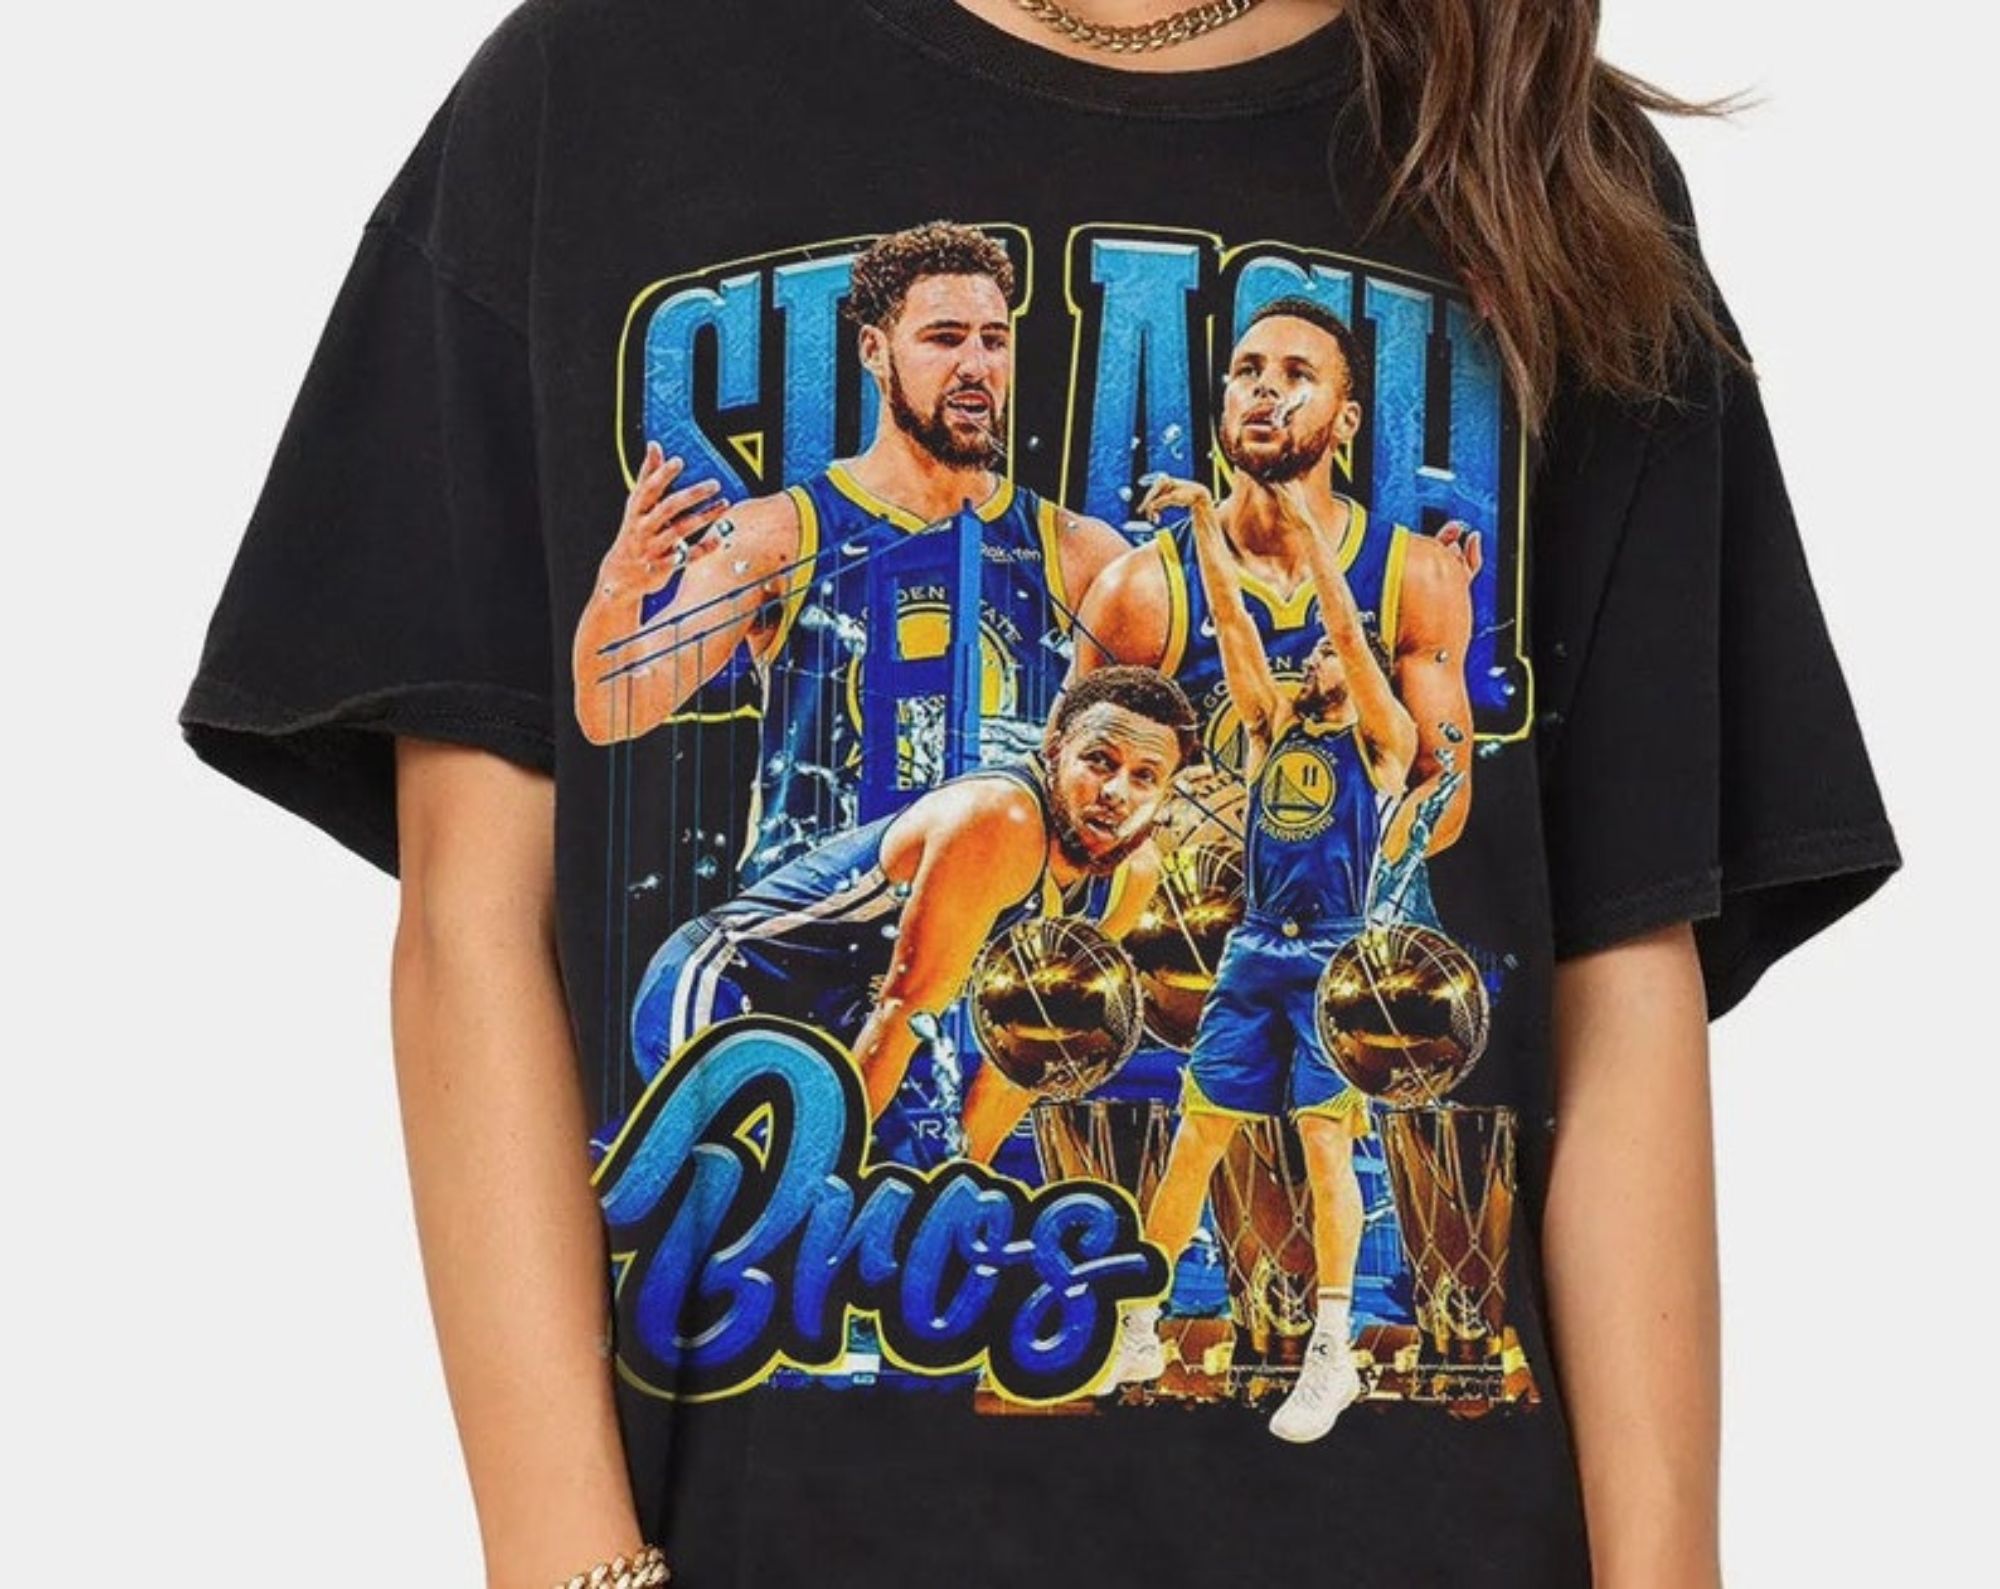 Klay Thompson Steph Curry Kevin Durant Cartoon Golden state shirt